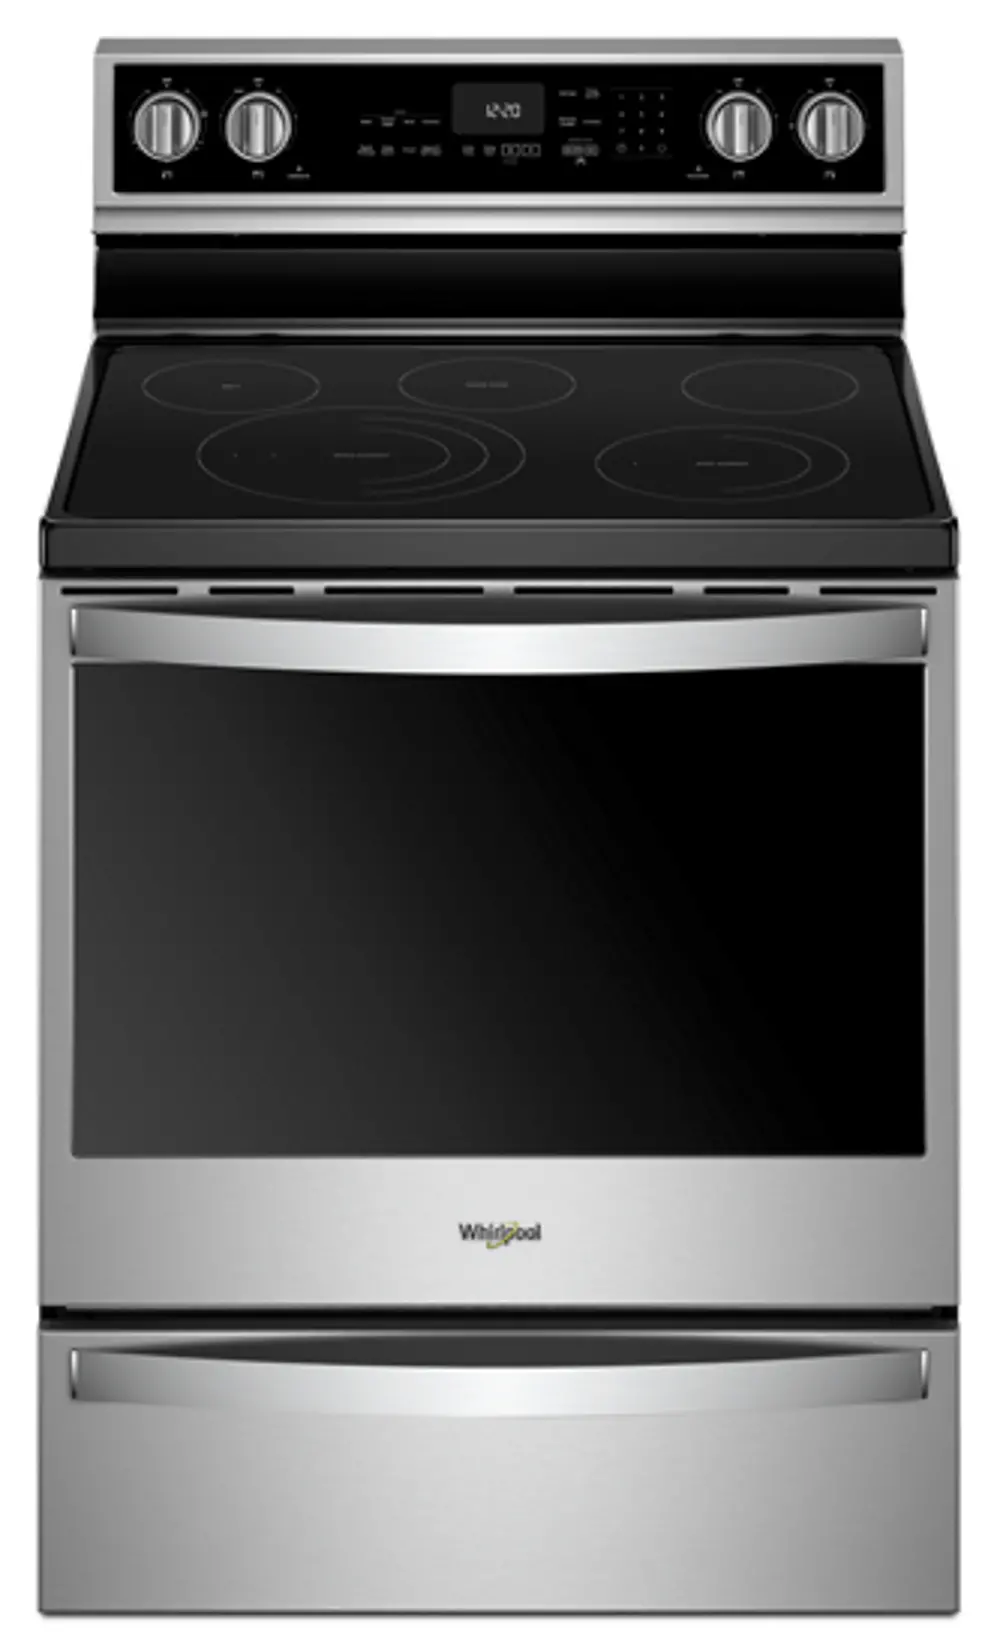 WFE975H0HZ Whirlpool 6.4 cu ft Electric Range - Stainless Steel-1